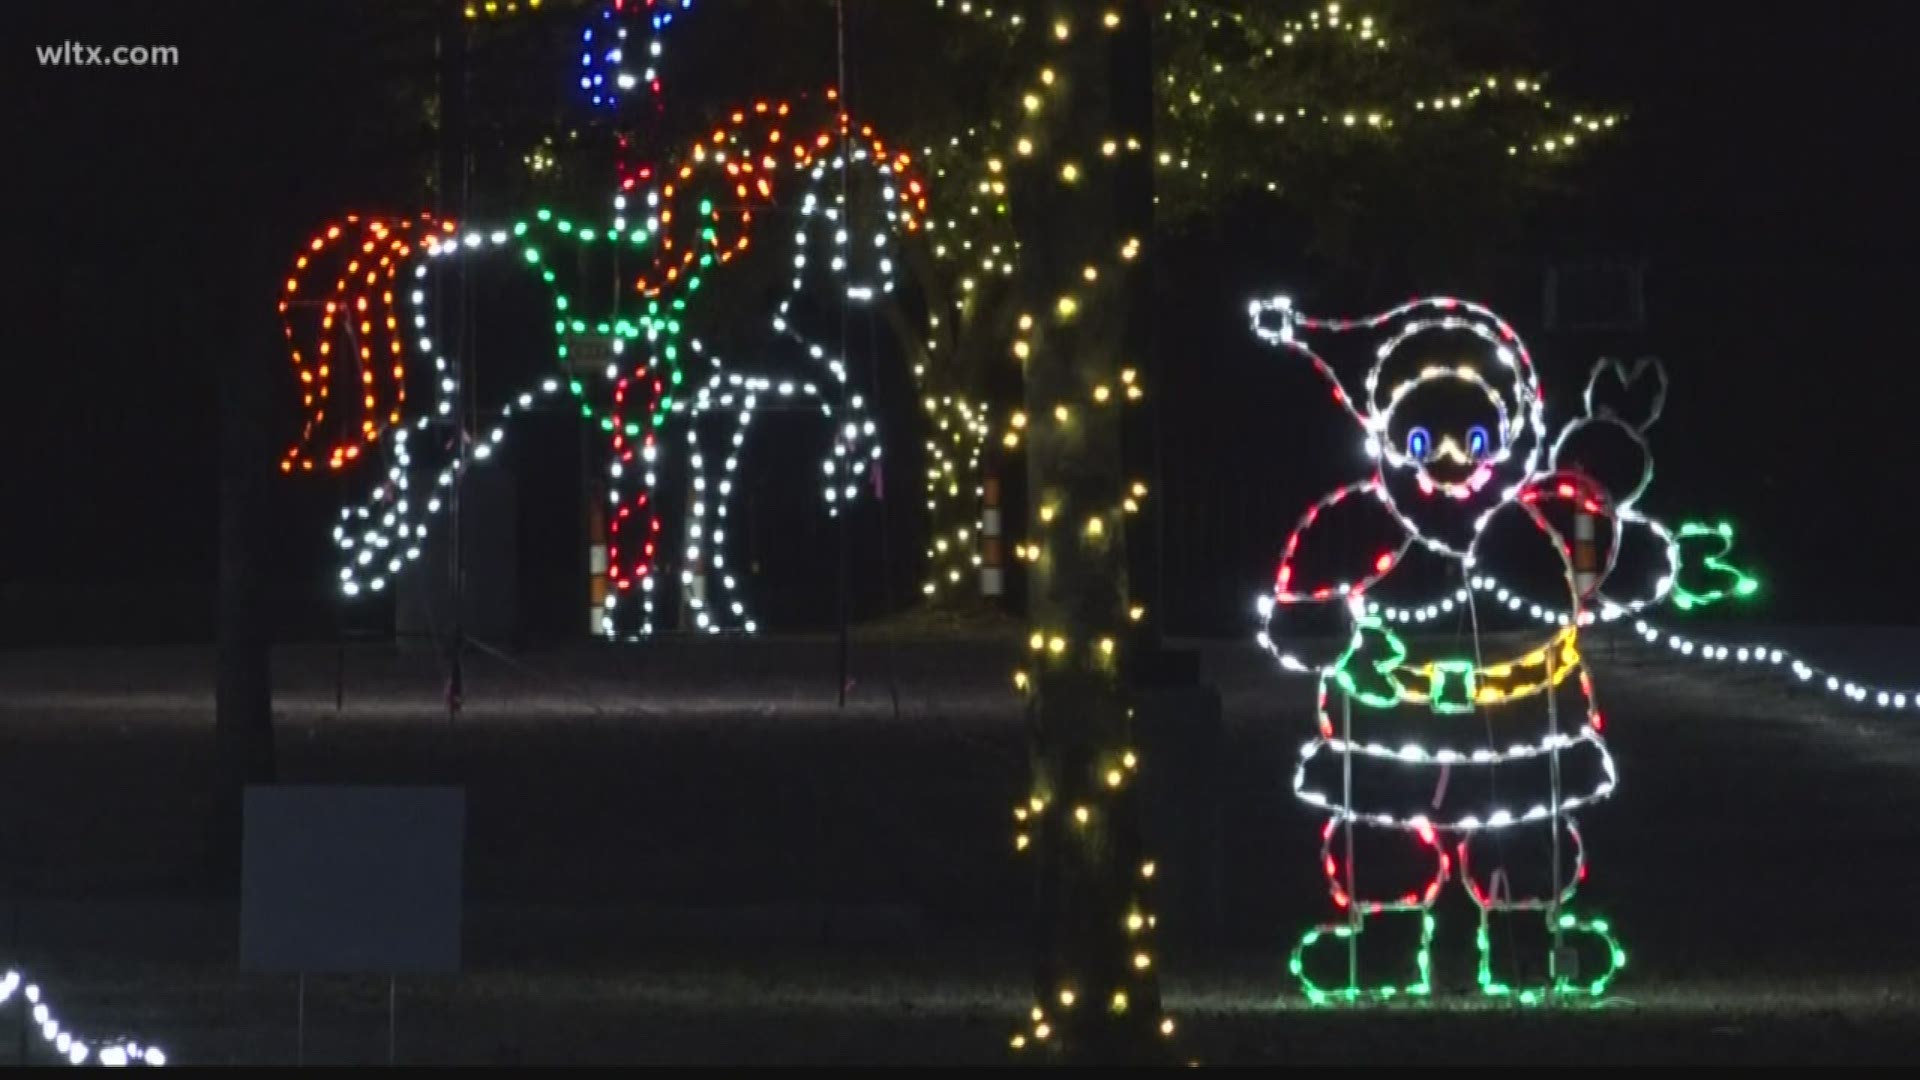 The drive-through light show runs from December 7 - 28 at the South Carolina State Fairgrounds. Here's a sneak peek!